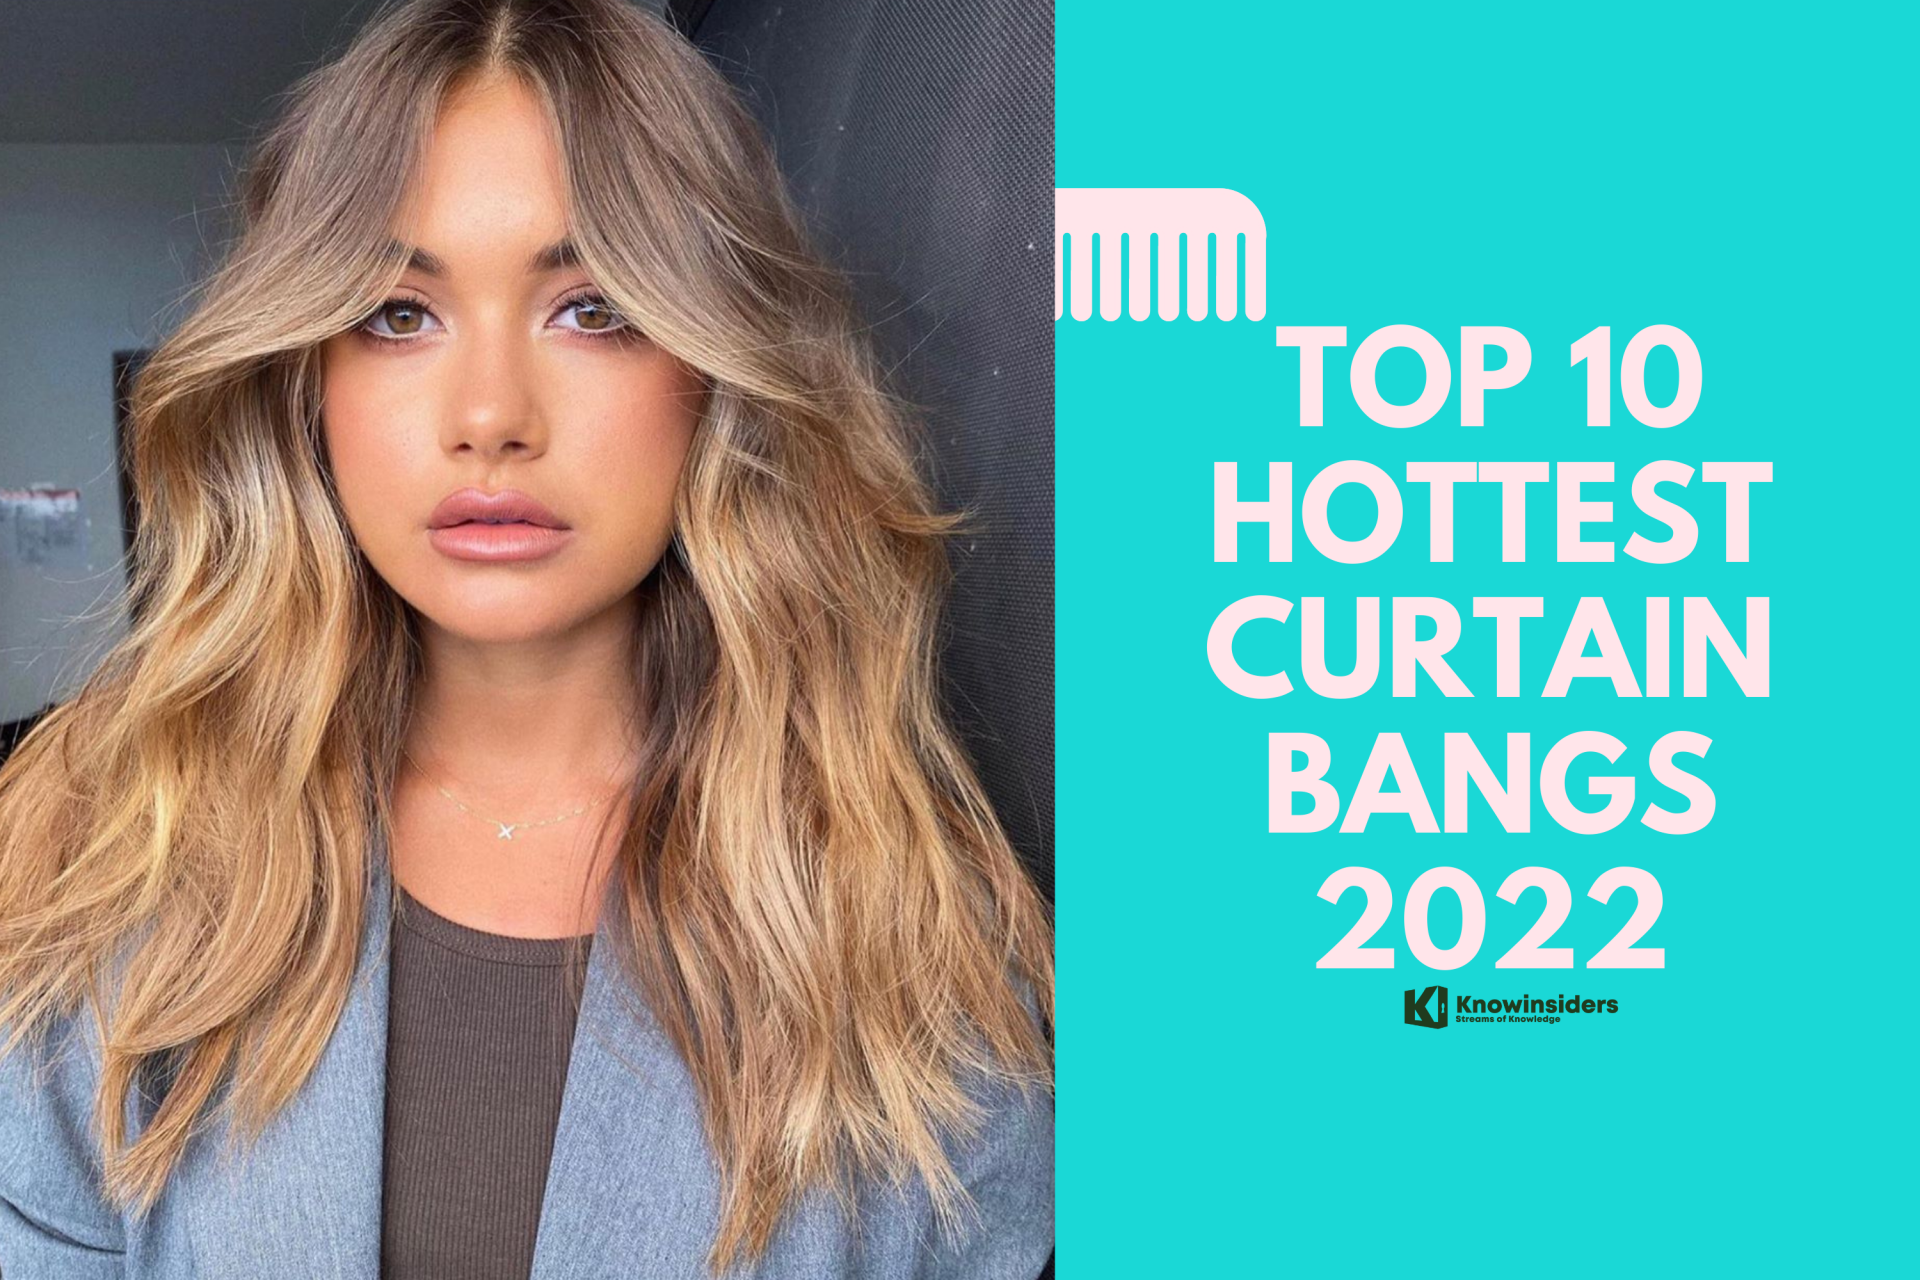 Top 10 Hottest Curtain Bangs In 2022